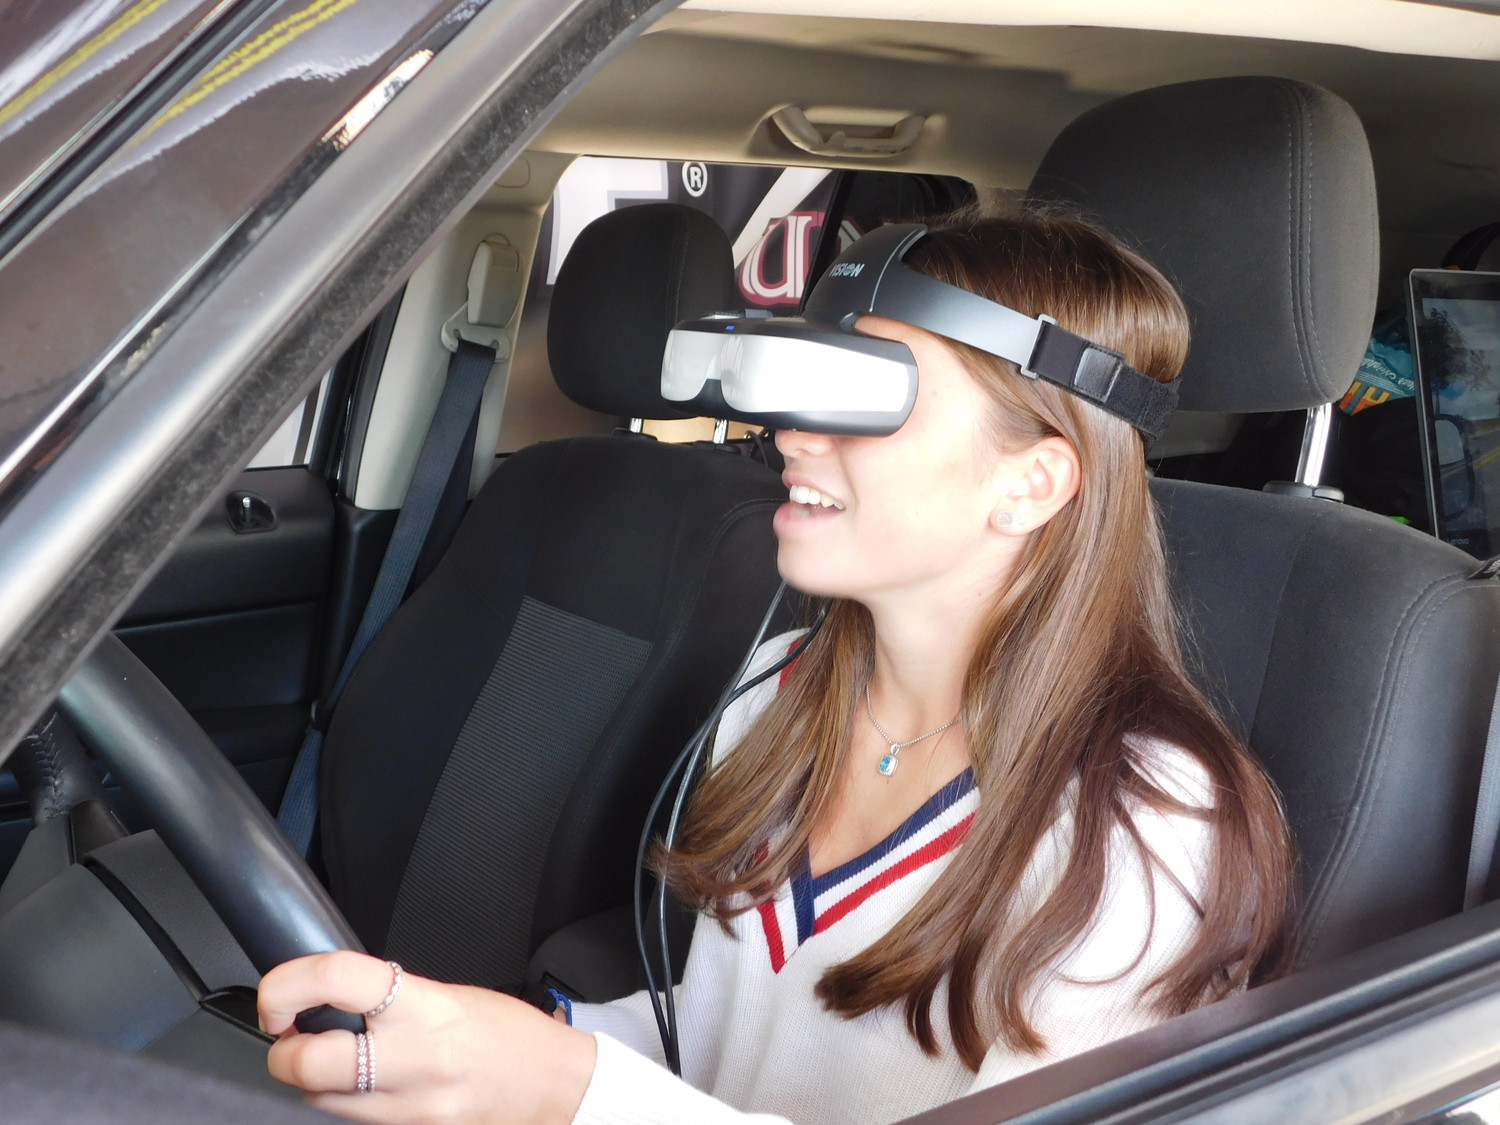 Isabella Pace donned the virtual reality headset and felt first-hand the difficulty of driving while texting.